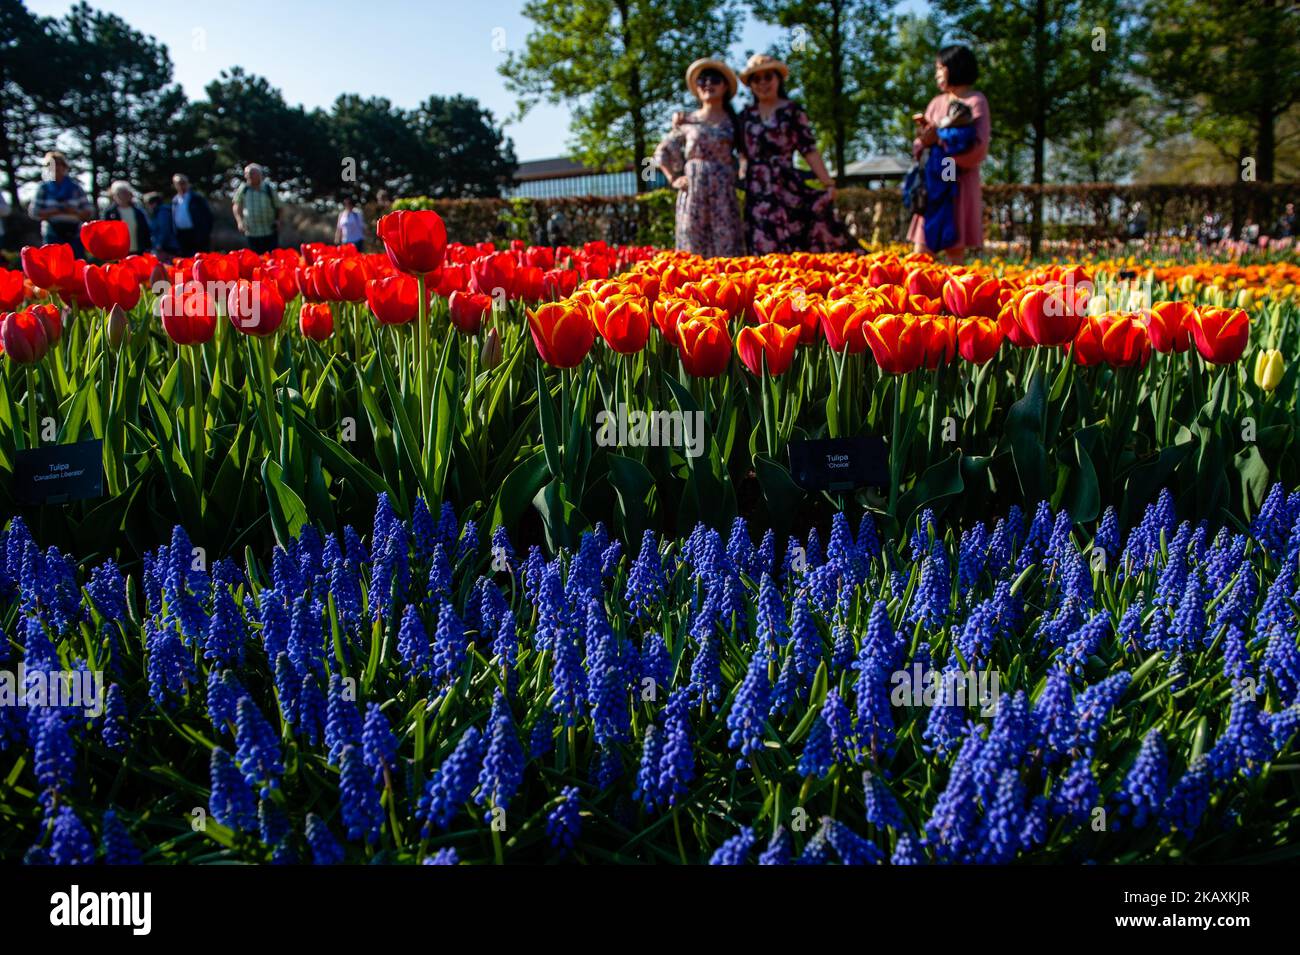 April 21, 2018 - Lisse. Keukenhof is also known as the Garden of Europe one of the world's largest flower gardens in Lisse, The Netherlands. The theme for Keukenhof 2018 is 'Romance in Flowers'. The park houses many early flowering species and the Willem-Alexander pavilion is already showing over 500 varieties of flowering tulip. Keukenhof is the place to enjoy millions of flowering tulips, daffodils and other bulb flowers this spring. By the time it closes on 13 May 2018, the flower exhibition will have received over one million visitors from across the globe. (Photo by Romy Arroyo Fernandez/ Stock Photo